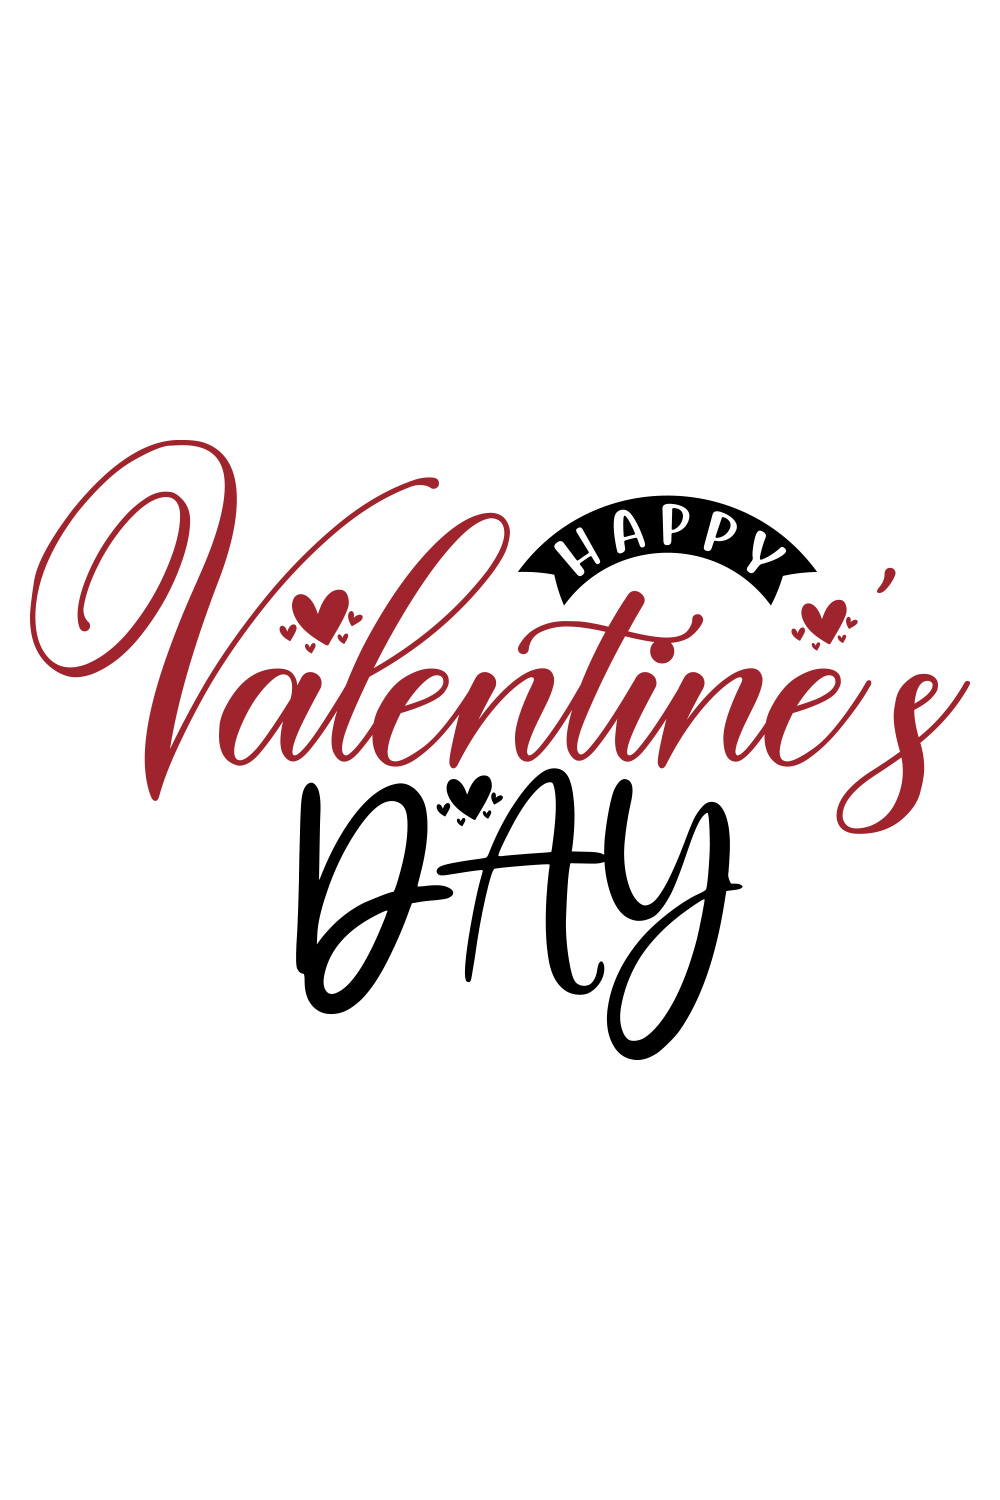 An image with a unique printable Happy Valentines Day lettering